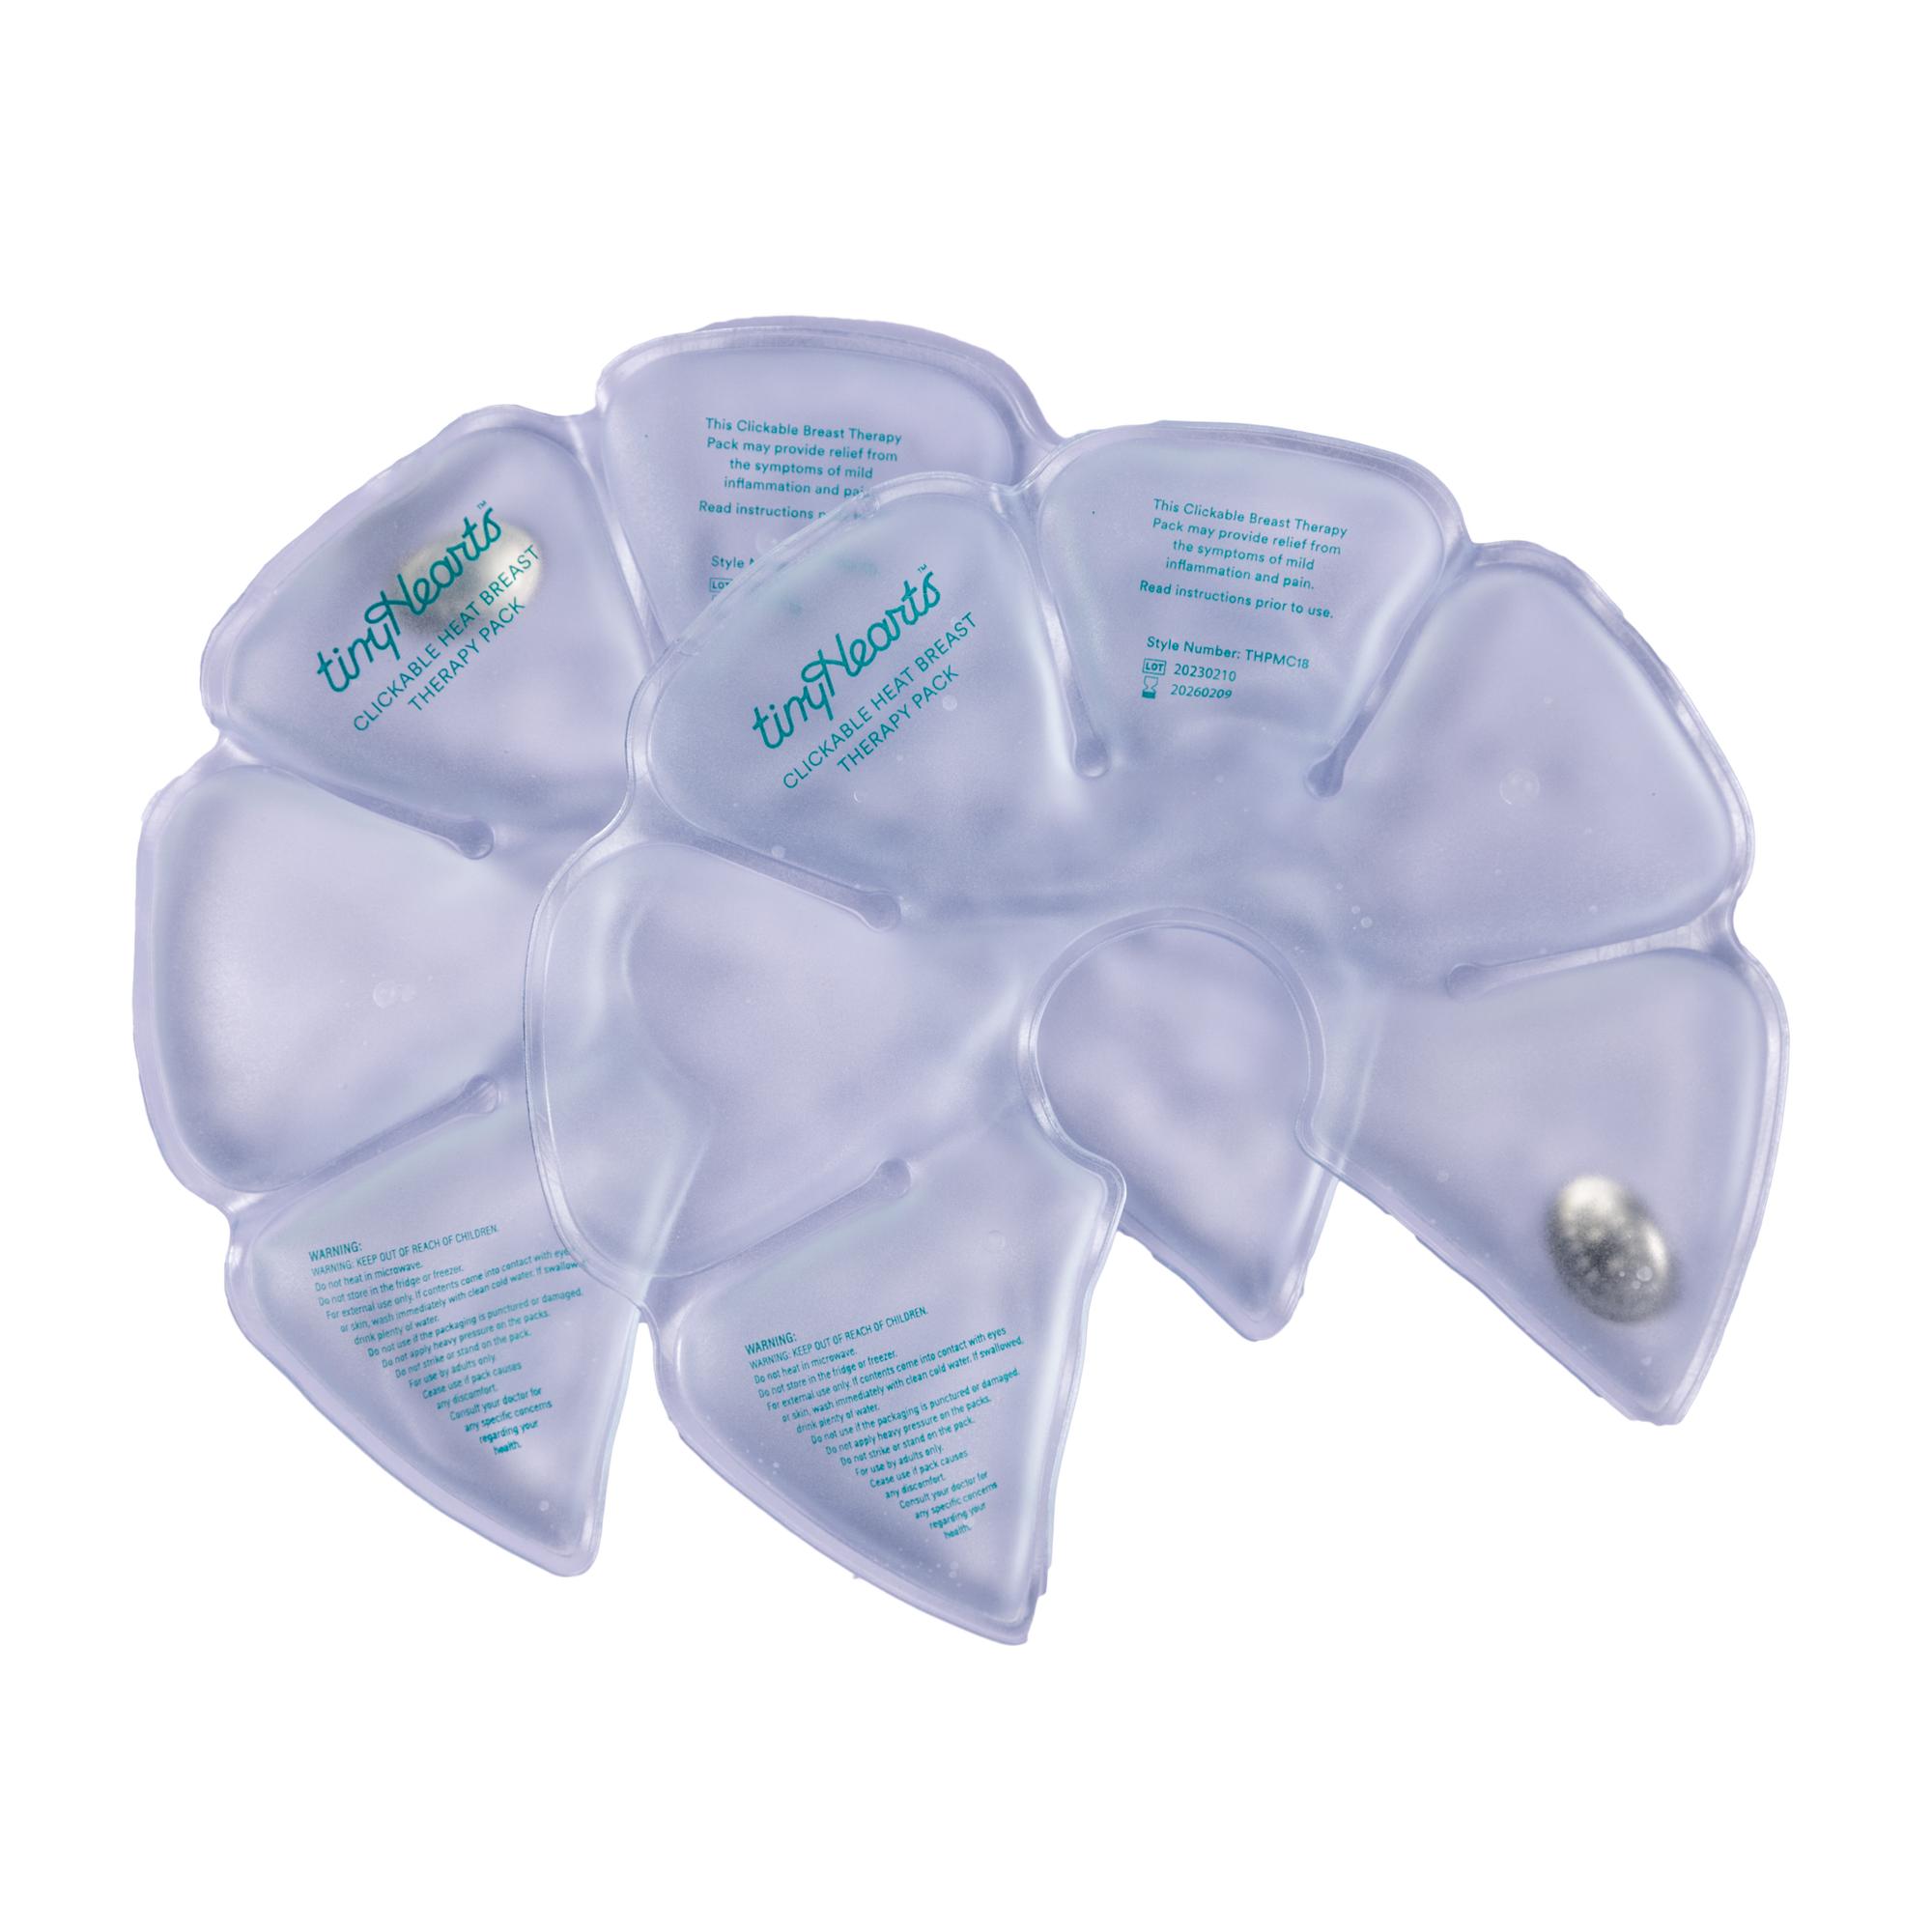 Clickable Heat Breast Therapy Packs - 2 Pack